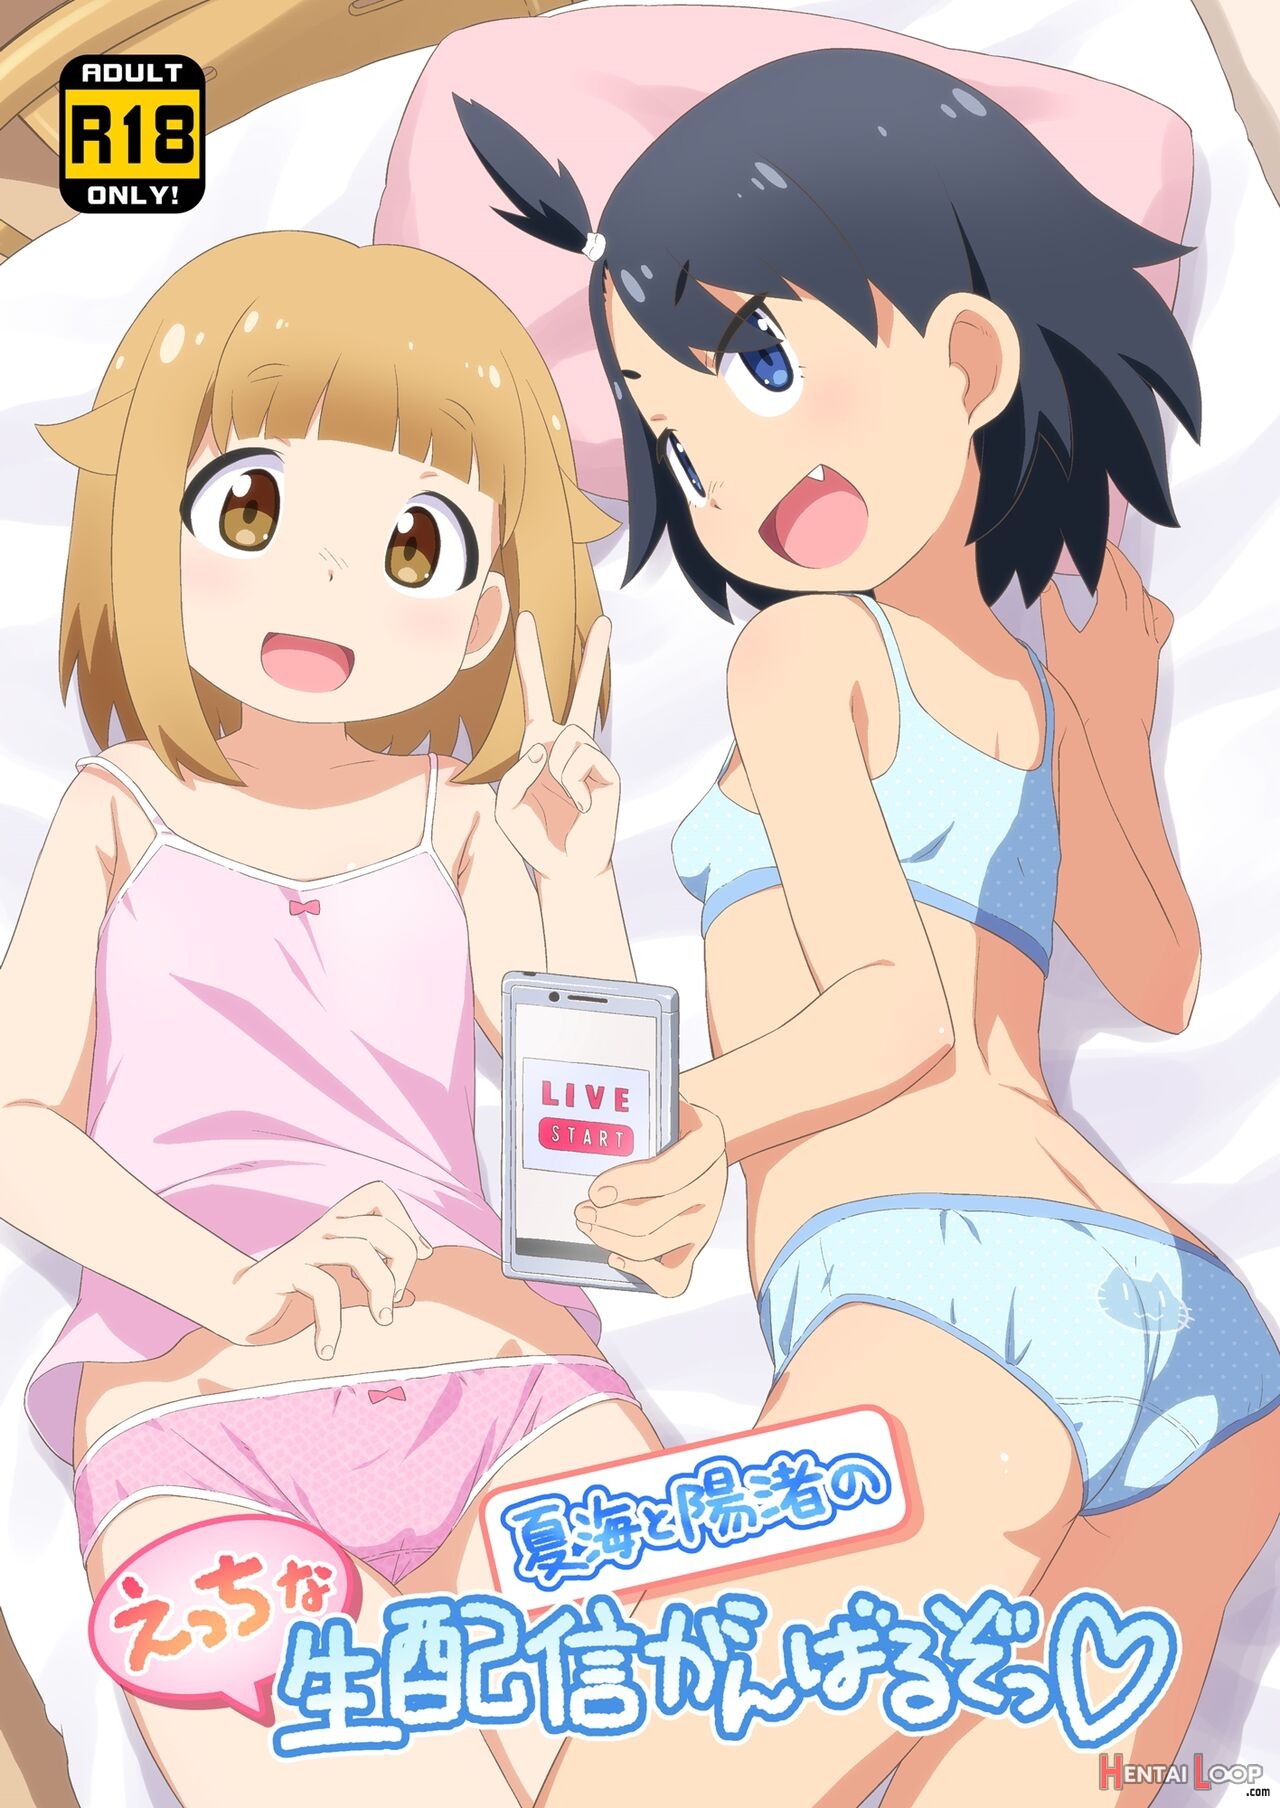 Natsumi And Hina Will Do Their Best At Their Lewd Live Streaming! page 1